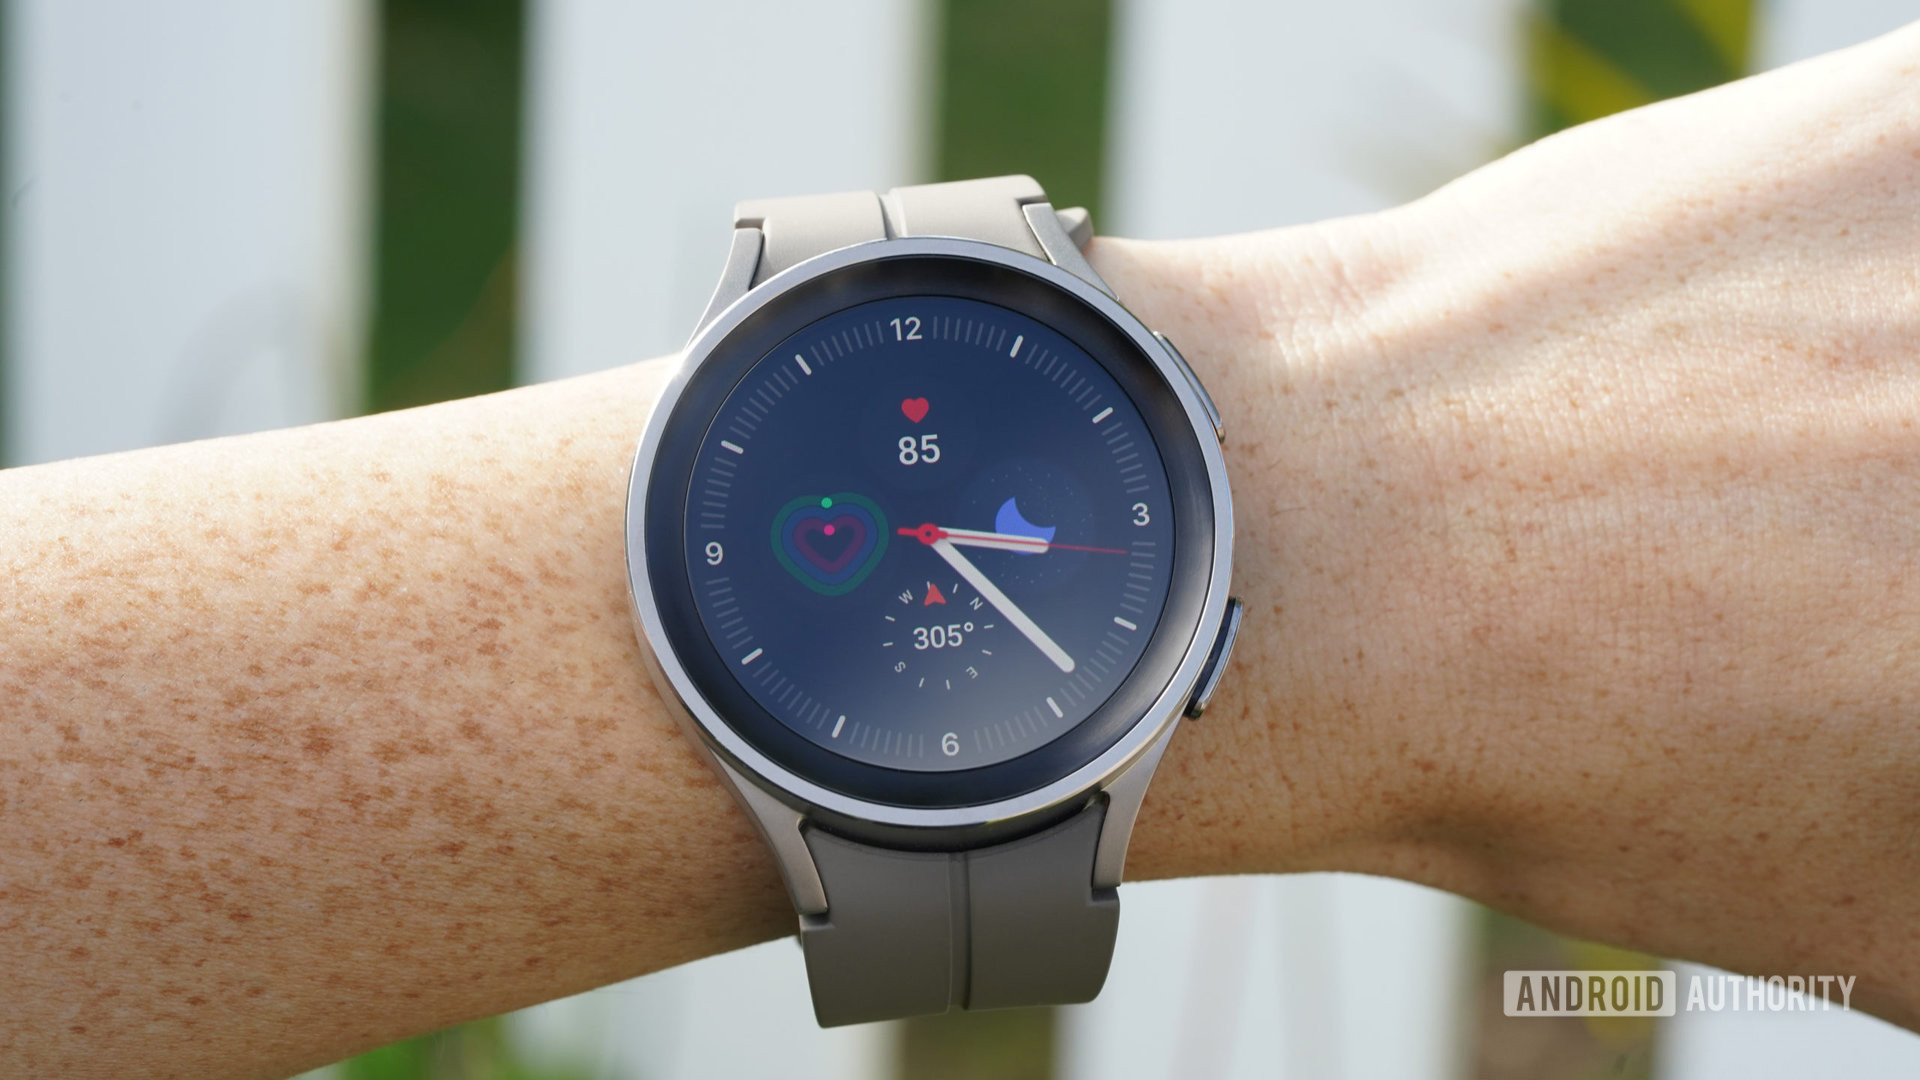 A Galaxy Watch 5 Pro on a user's wrist displays the watch face.